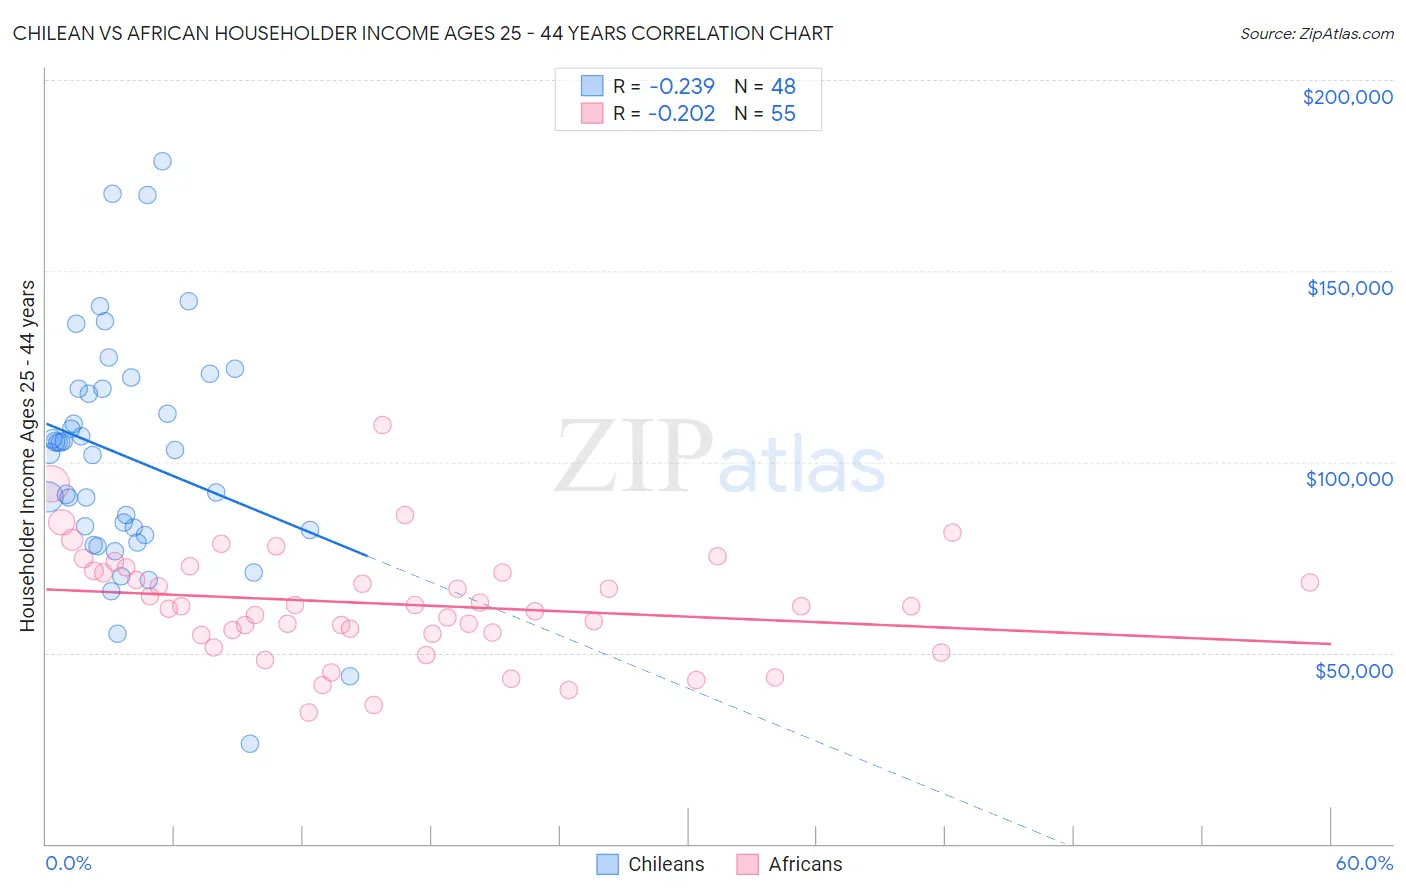 Chilean vs African Householder Income Ages 25 - 44 years